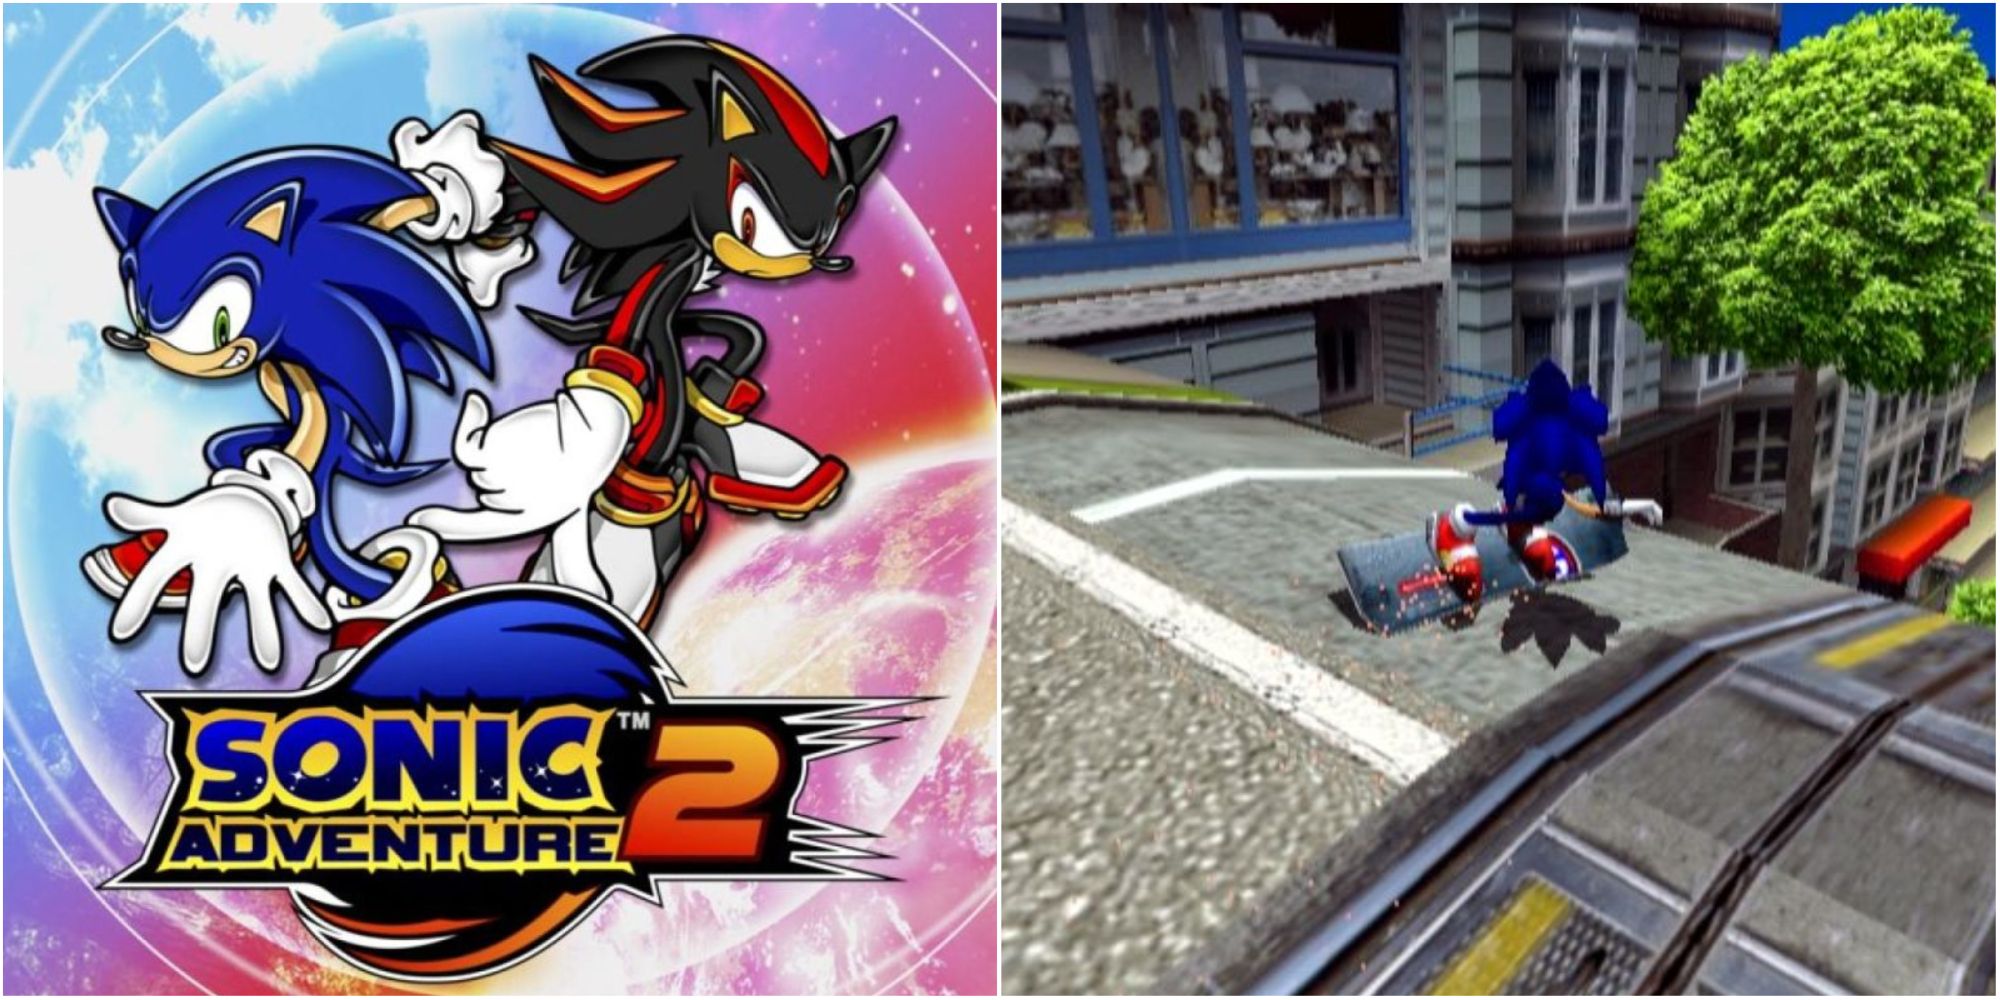 sonic adventure 2 cover & gameplay